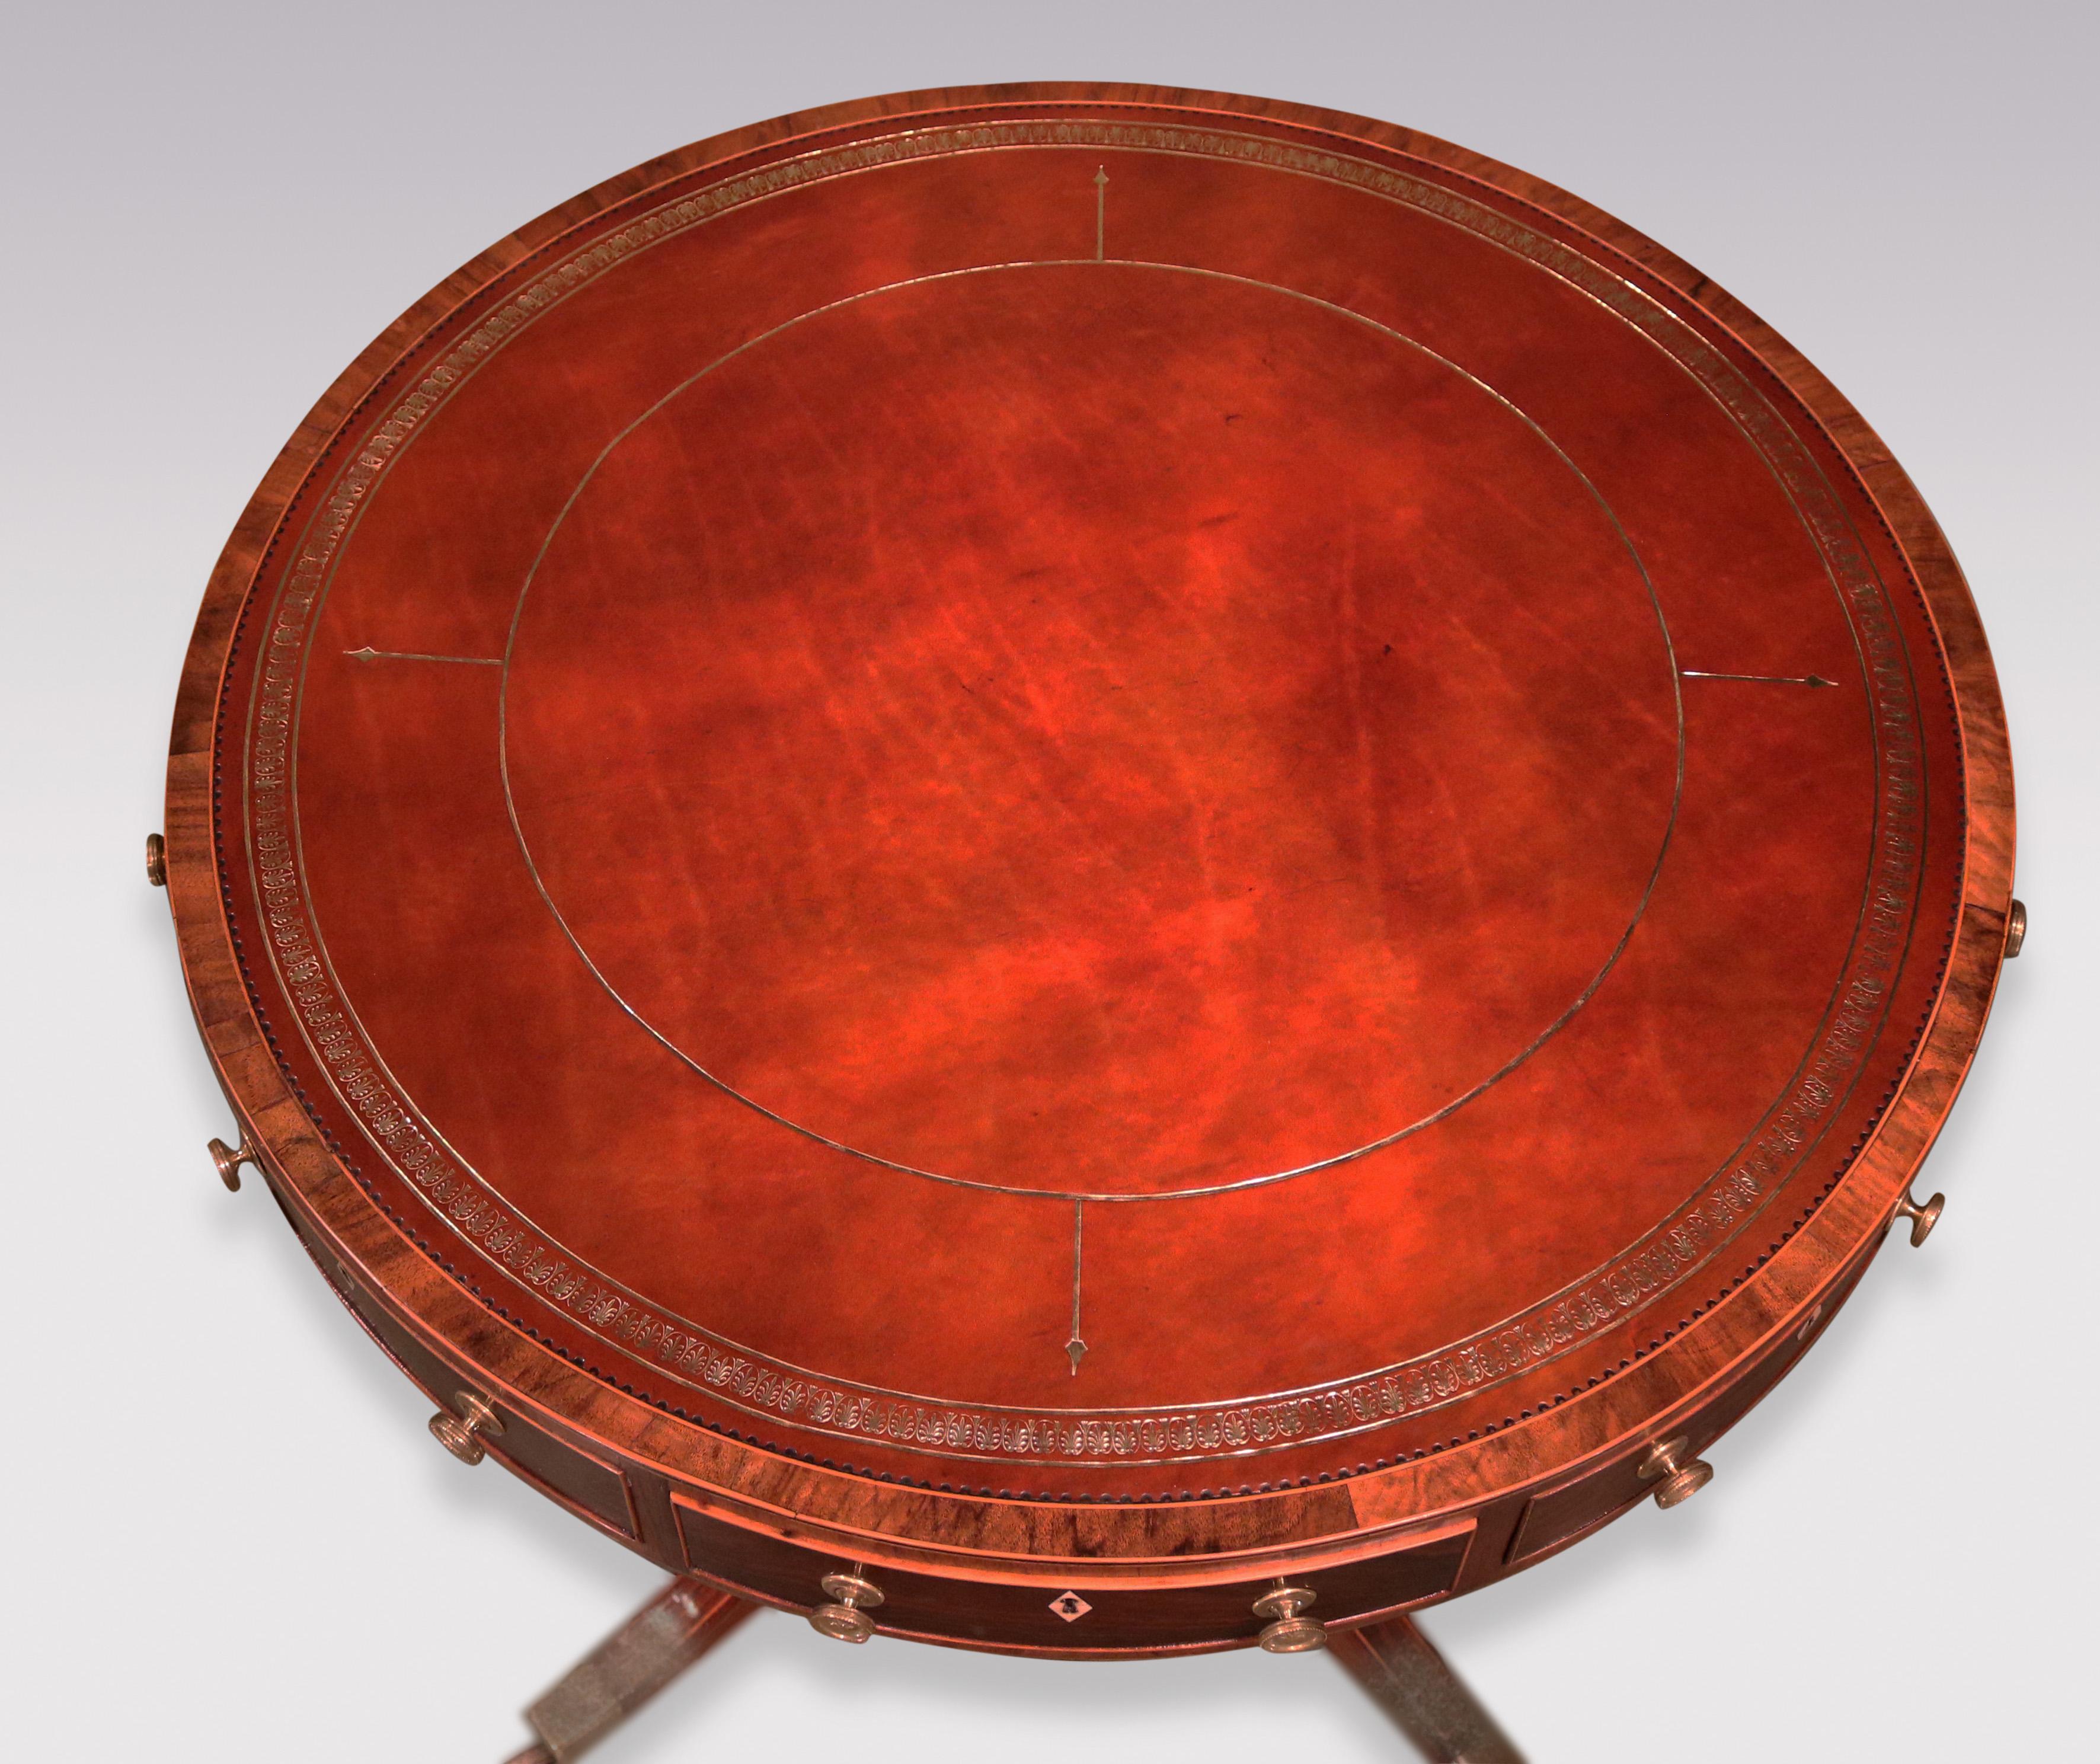 A fine George III period rosewood Drum Table of attractive small proportions, boxwood strung throughout, having circular faded red leather gilt tooled top, with tulipwood banded frieze fitted with 4 drawers & pen-drawer, on turned gunbarrel stem